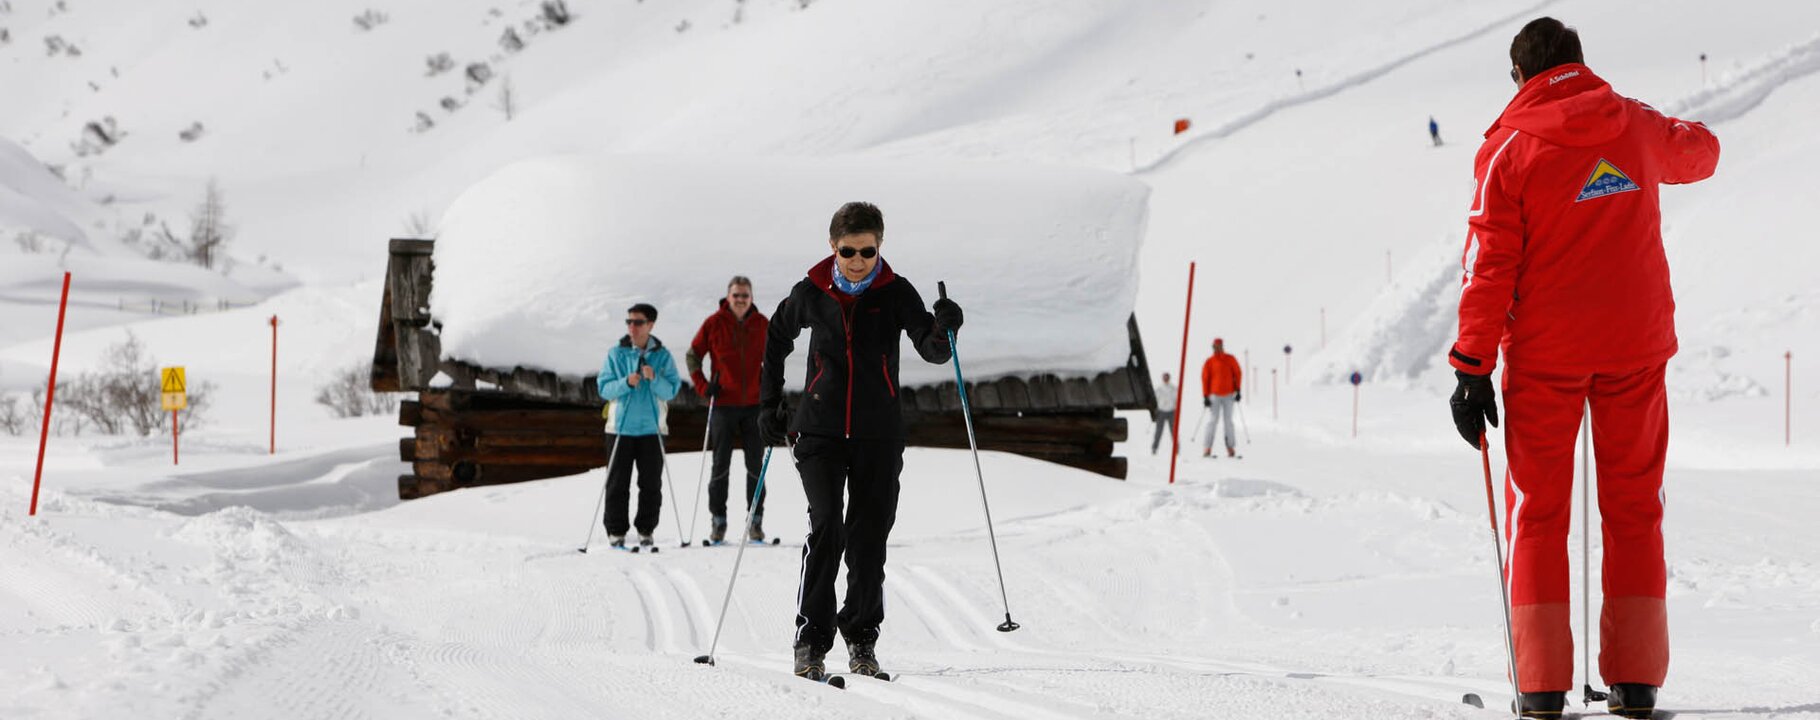 Learn Cross-country skiing in Serfaus-Fiss-Ladis in Tyrol. This is Cross-country skiing for beginner and advanced in Austria | © Skischule Serfaus - christianwaldegger.com